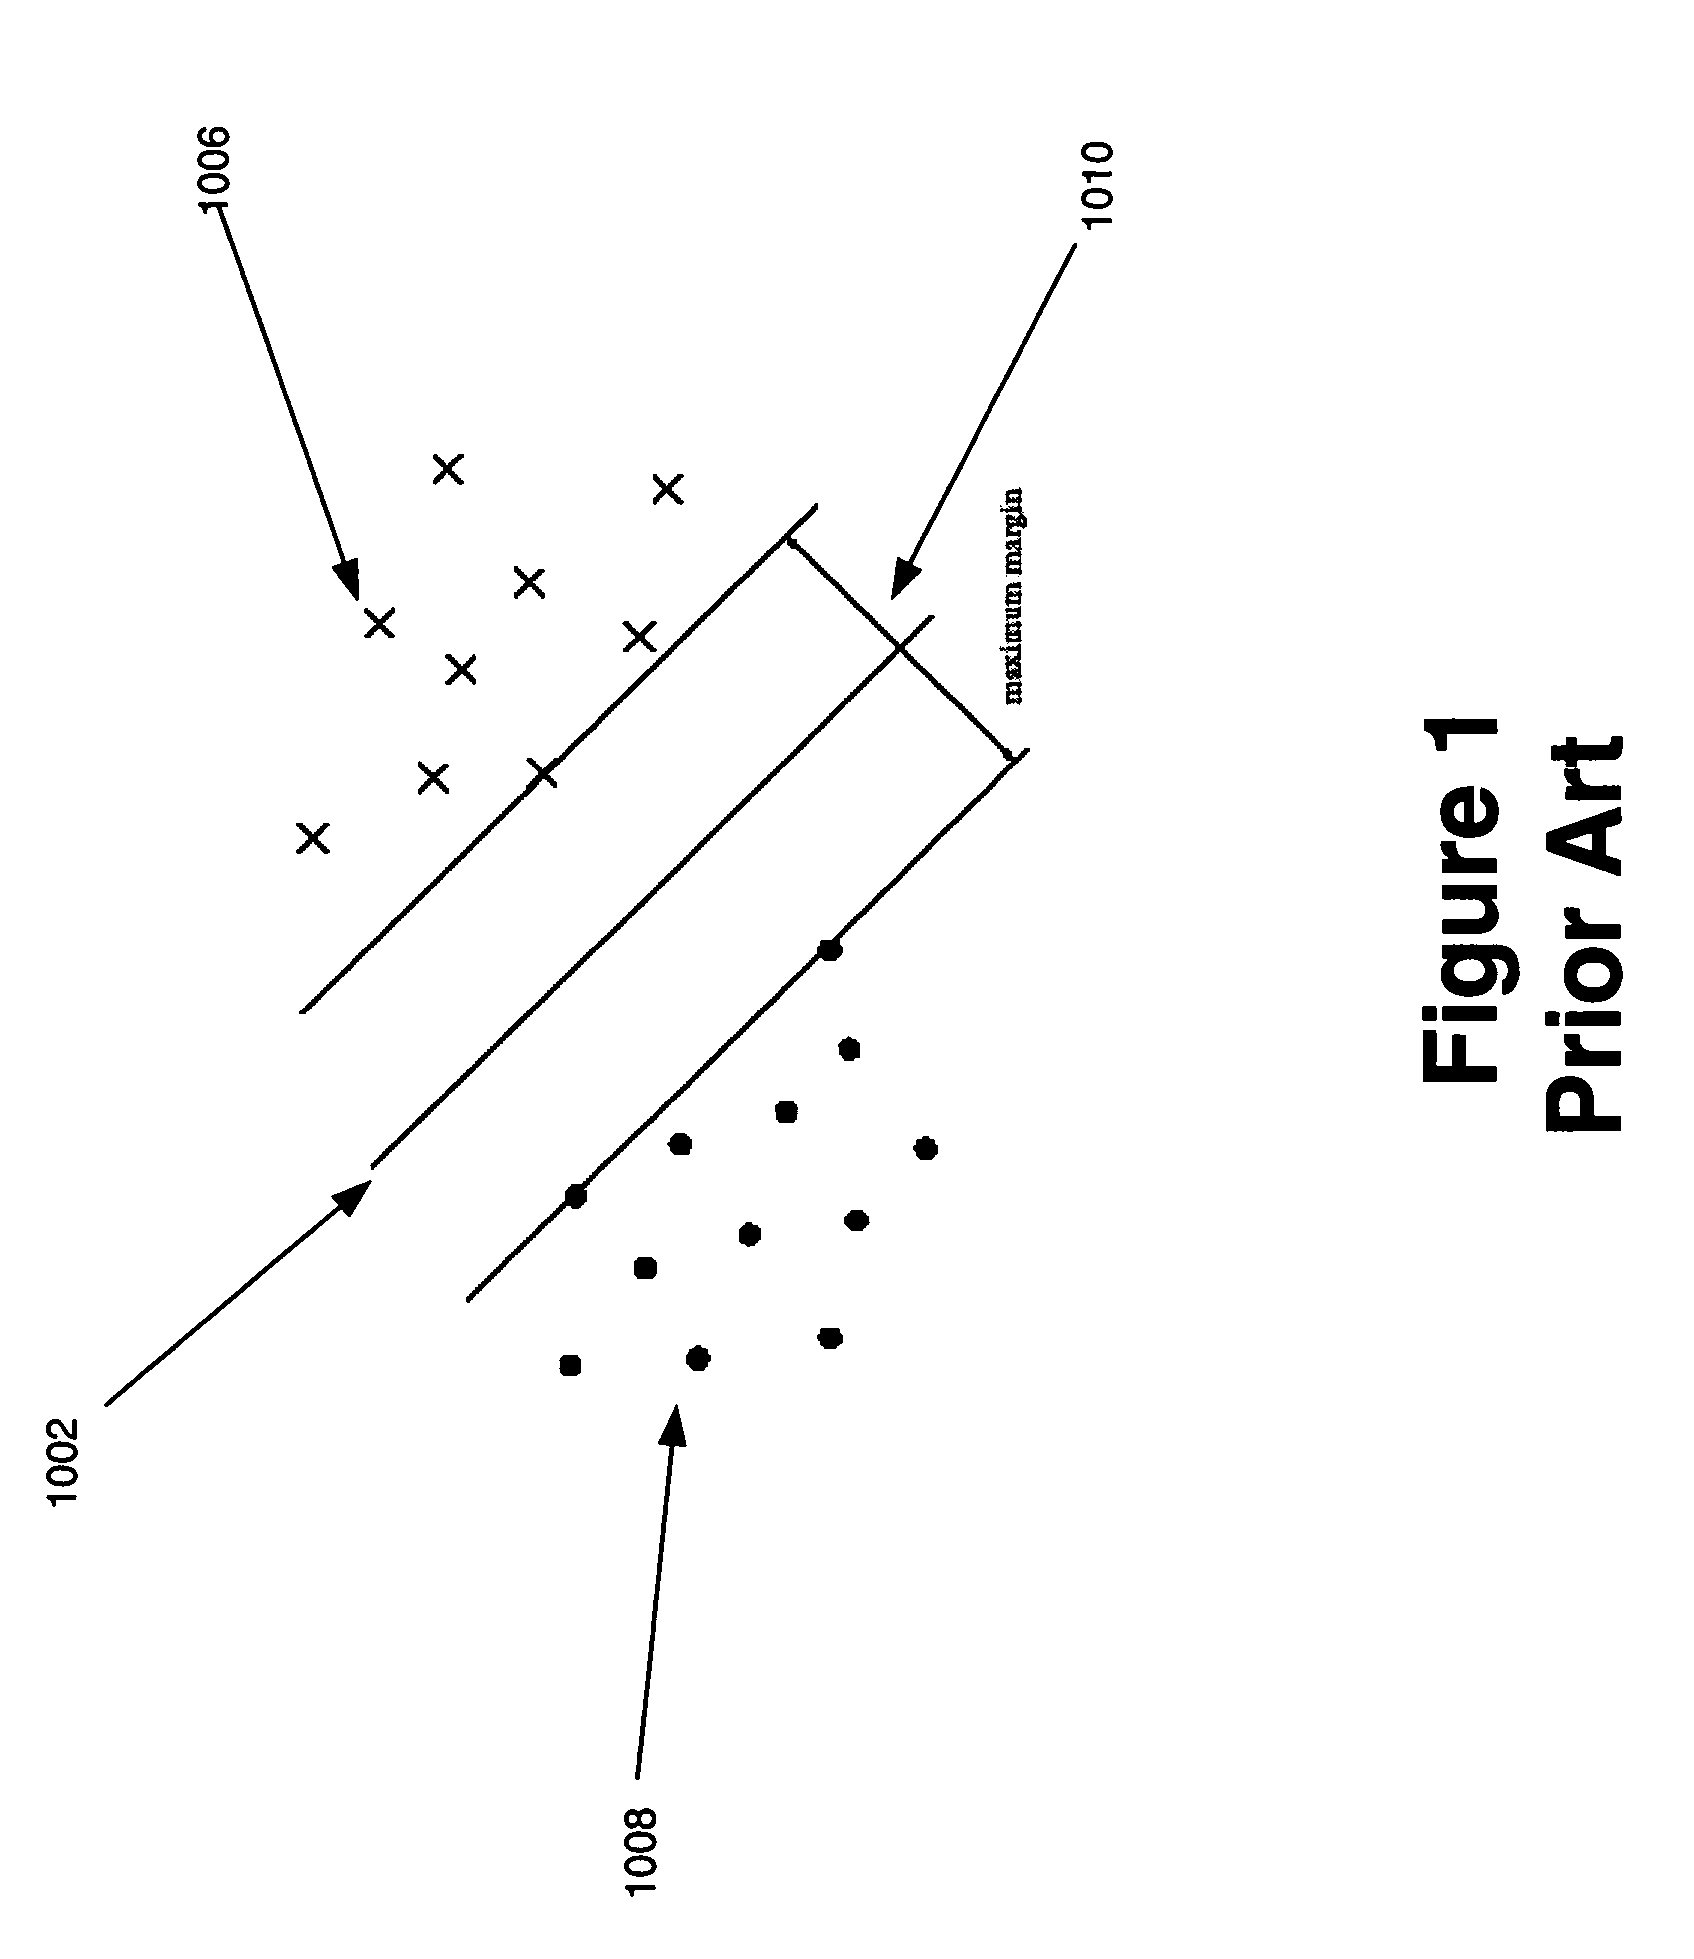 Methods to distribute multi-class classification learning on several processors